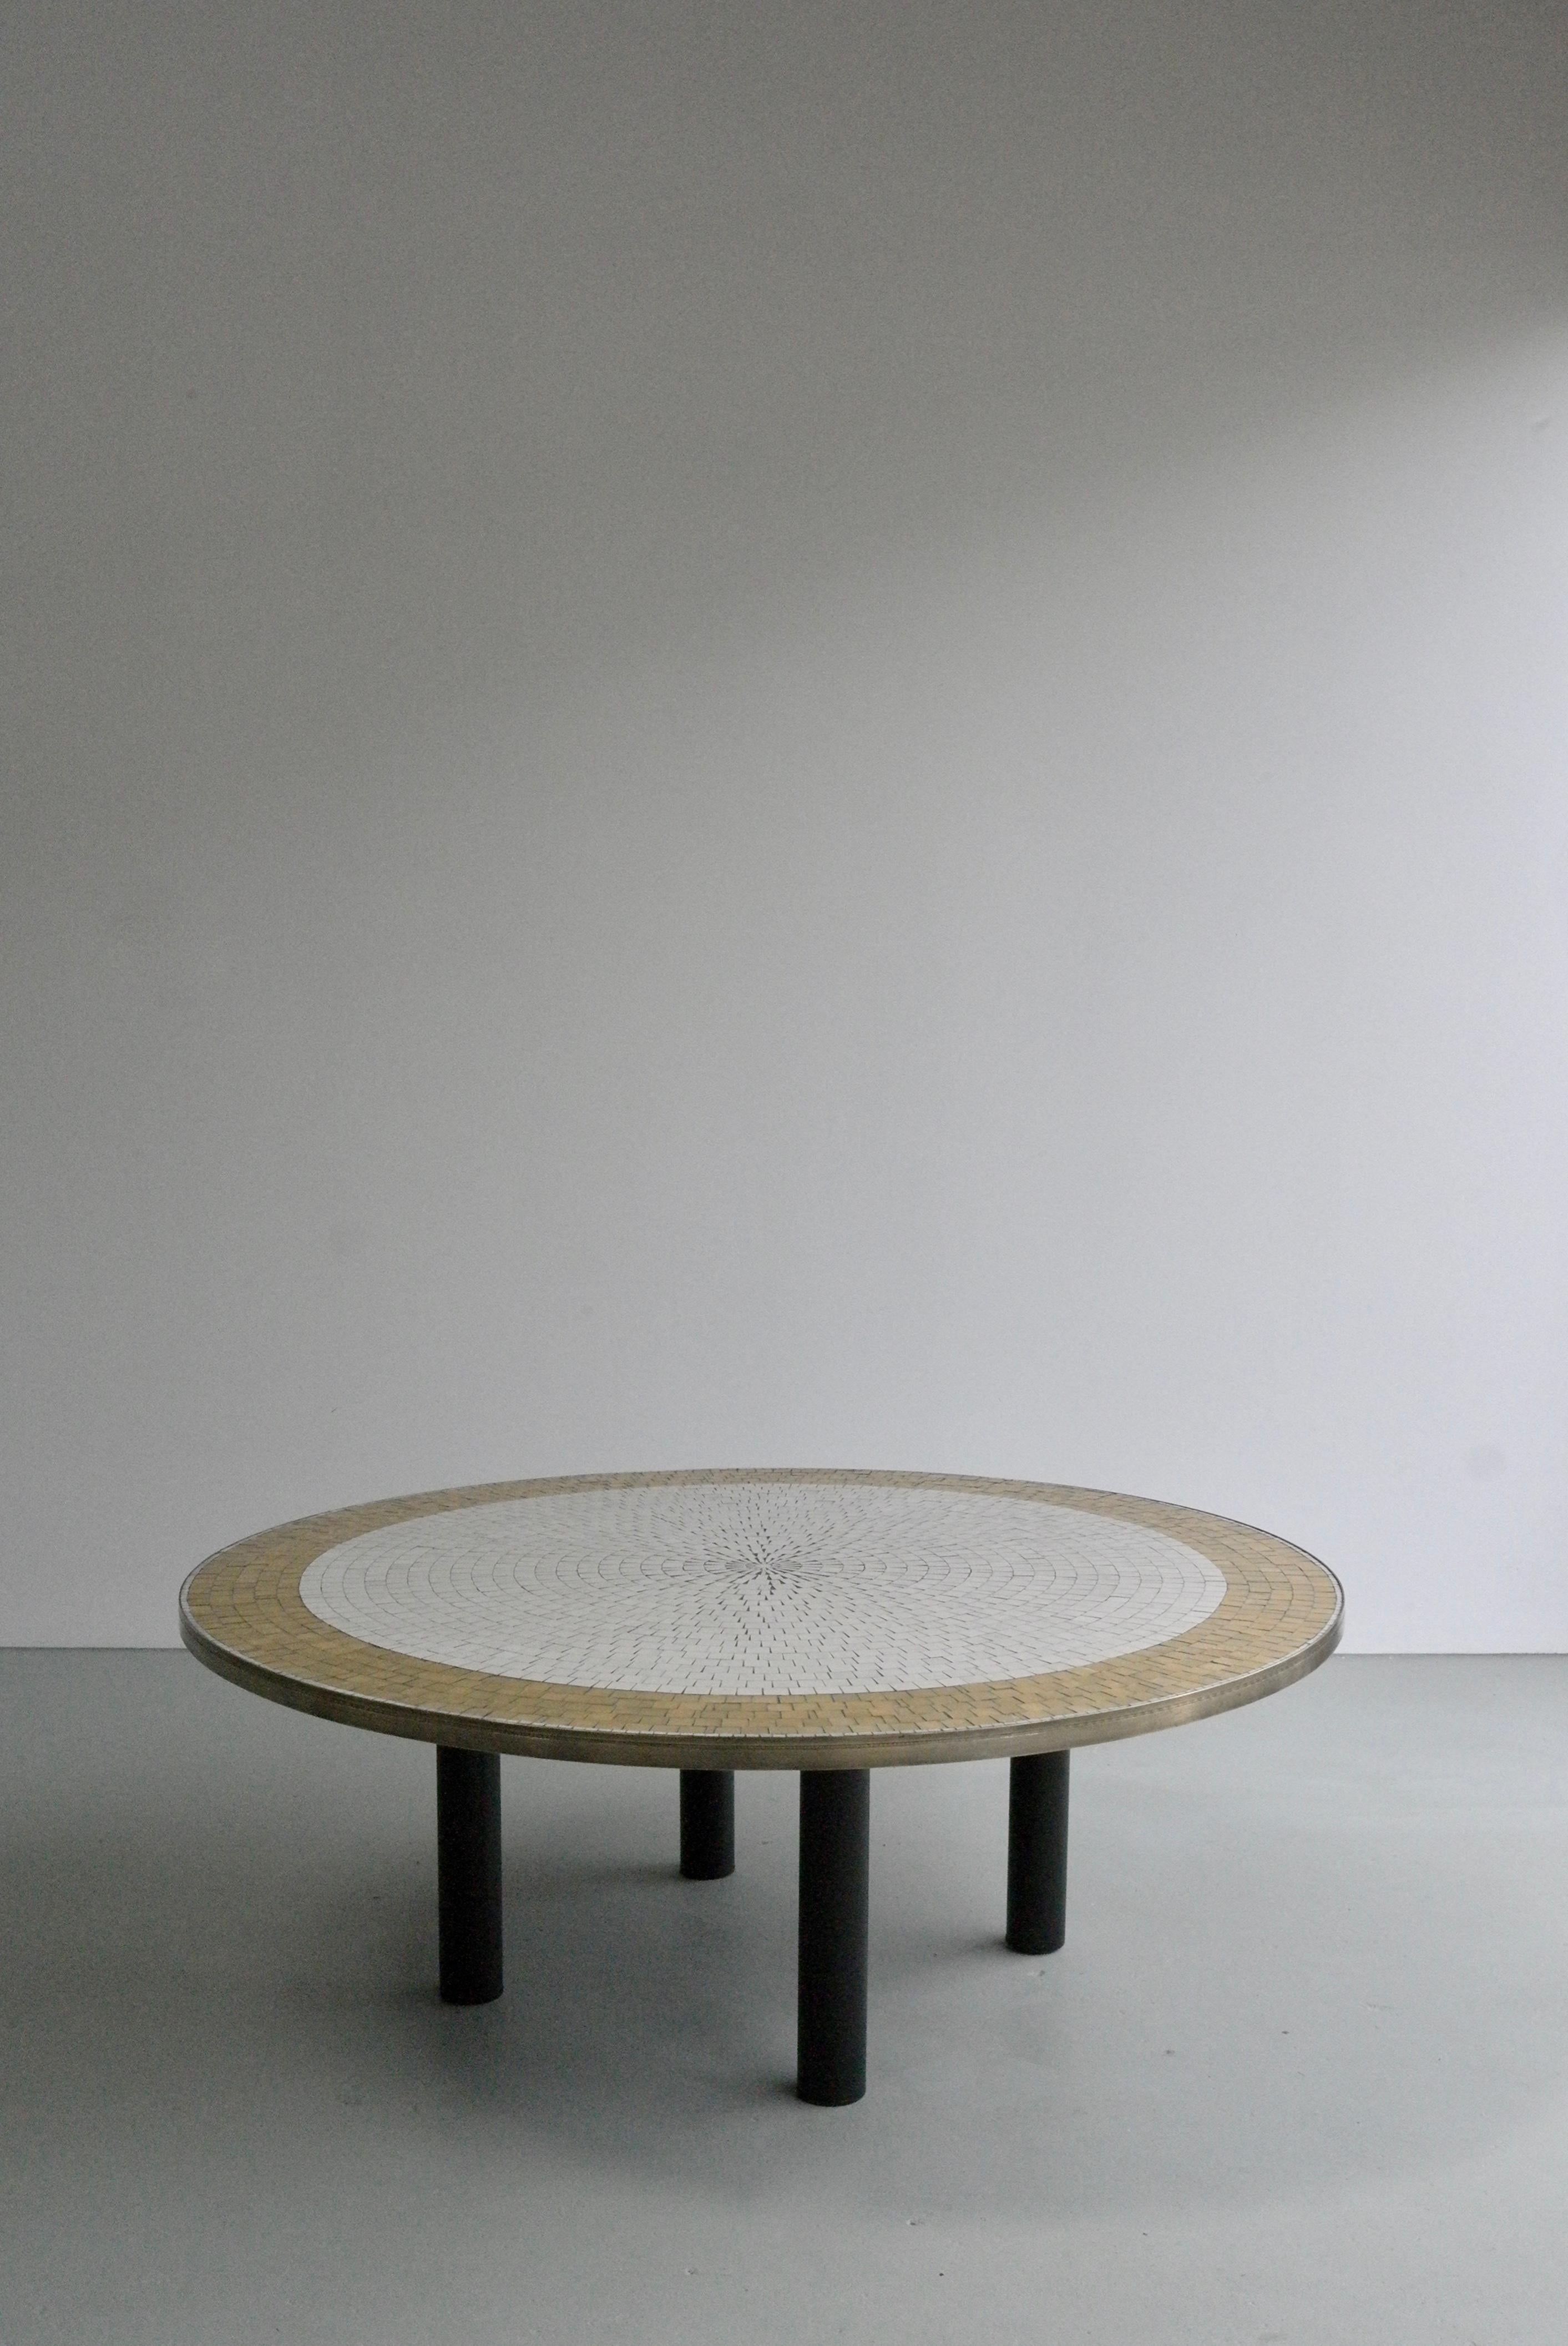  Berthold Müller Round Mosaic Gold and White Tile Coffee Table, 1960s 4